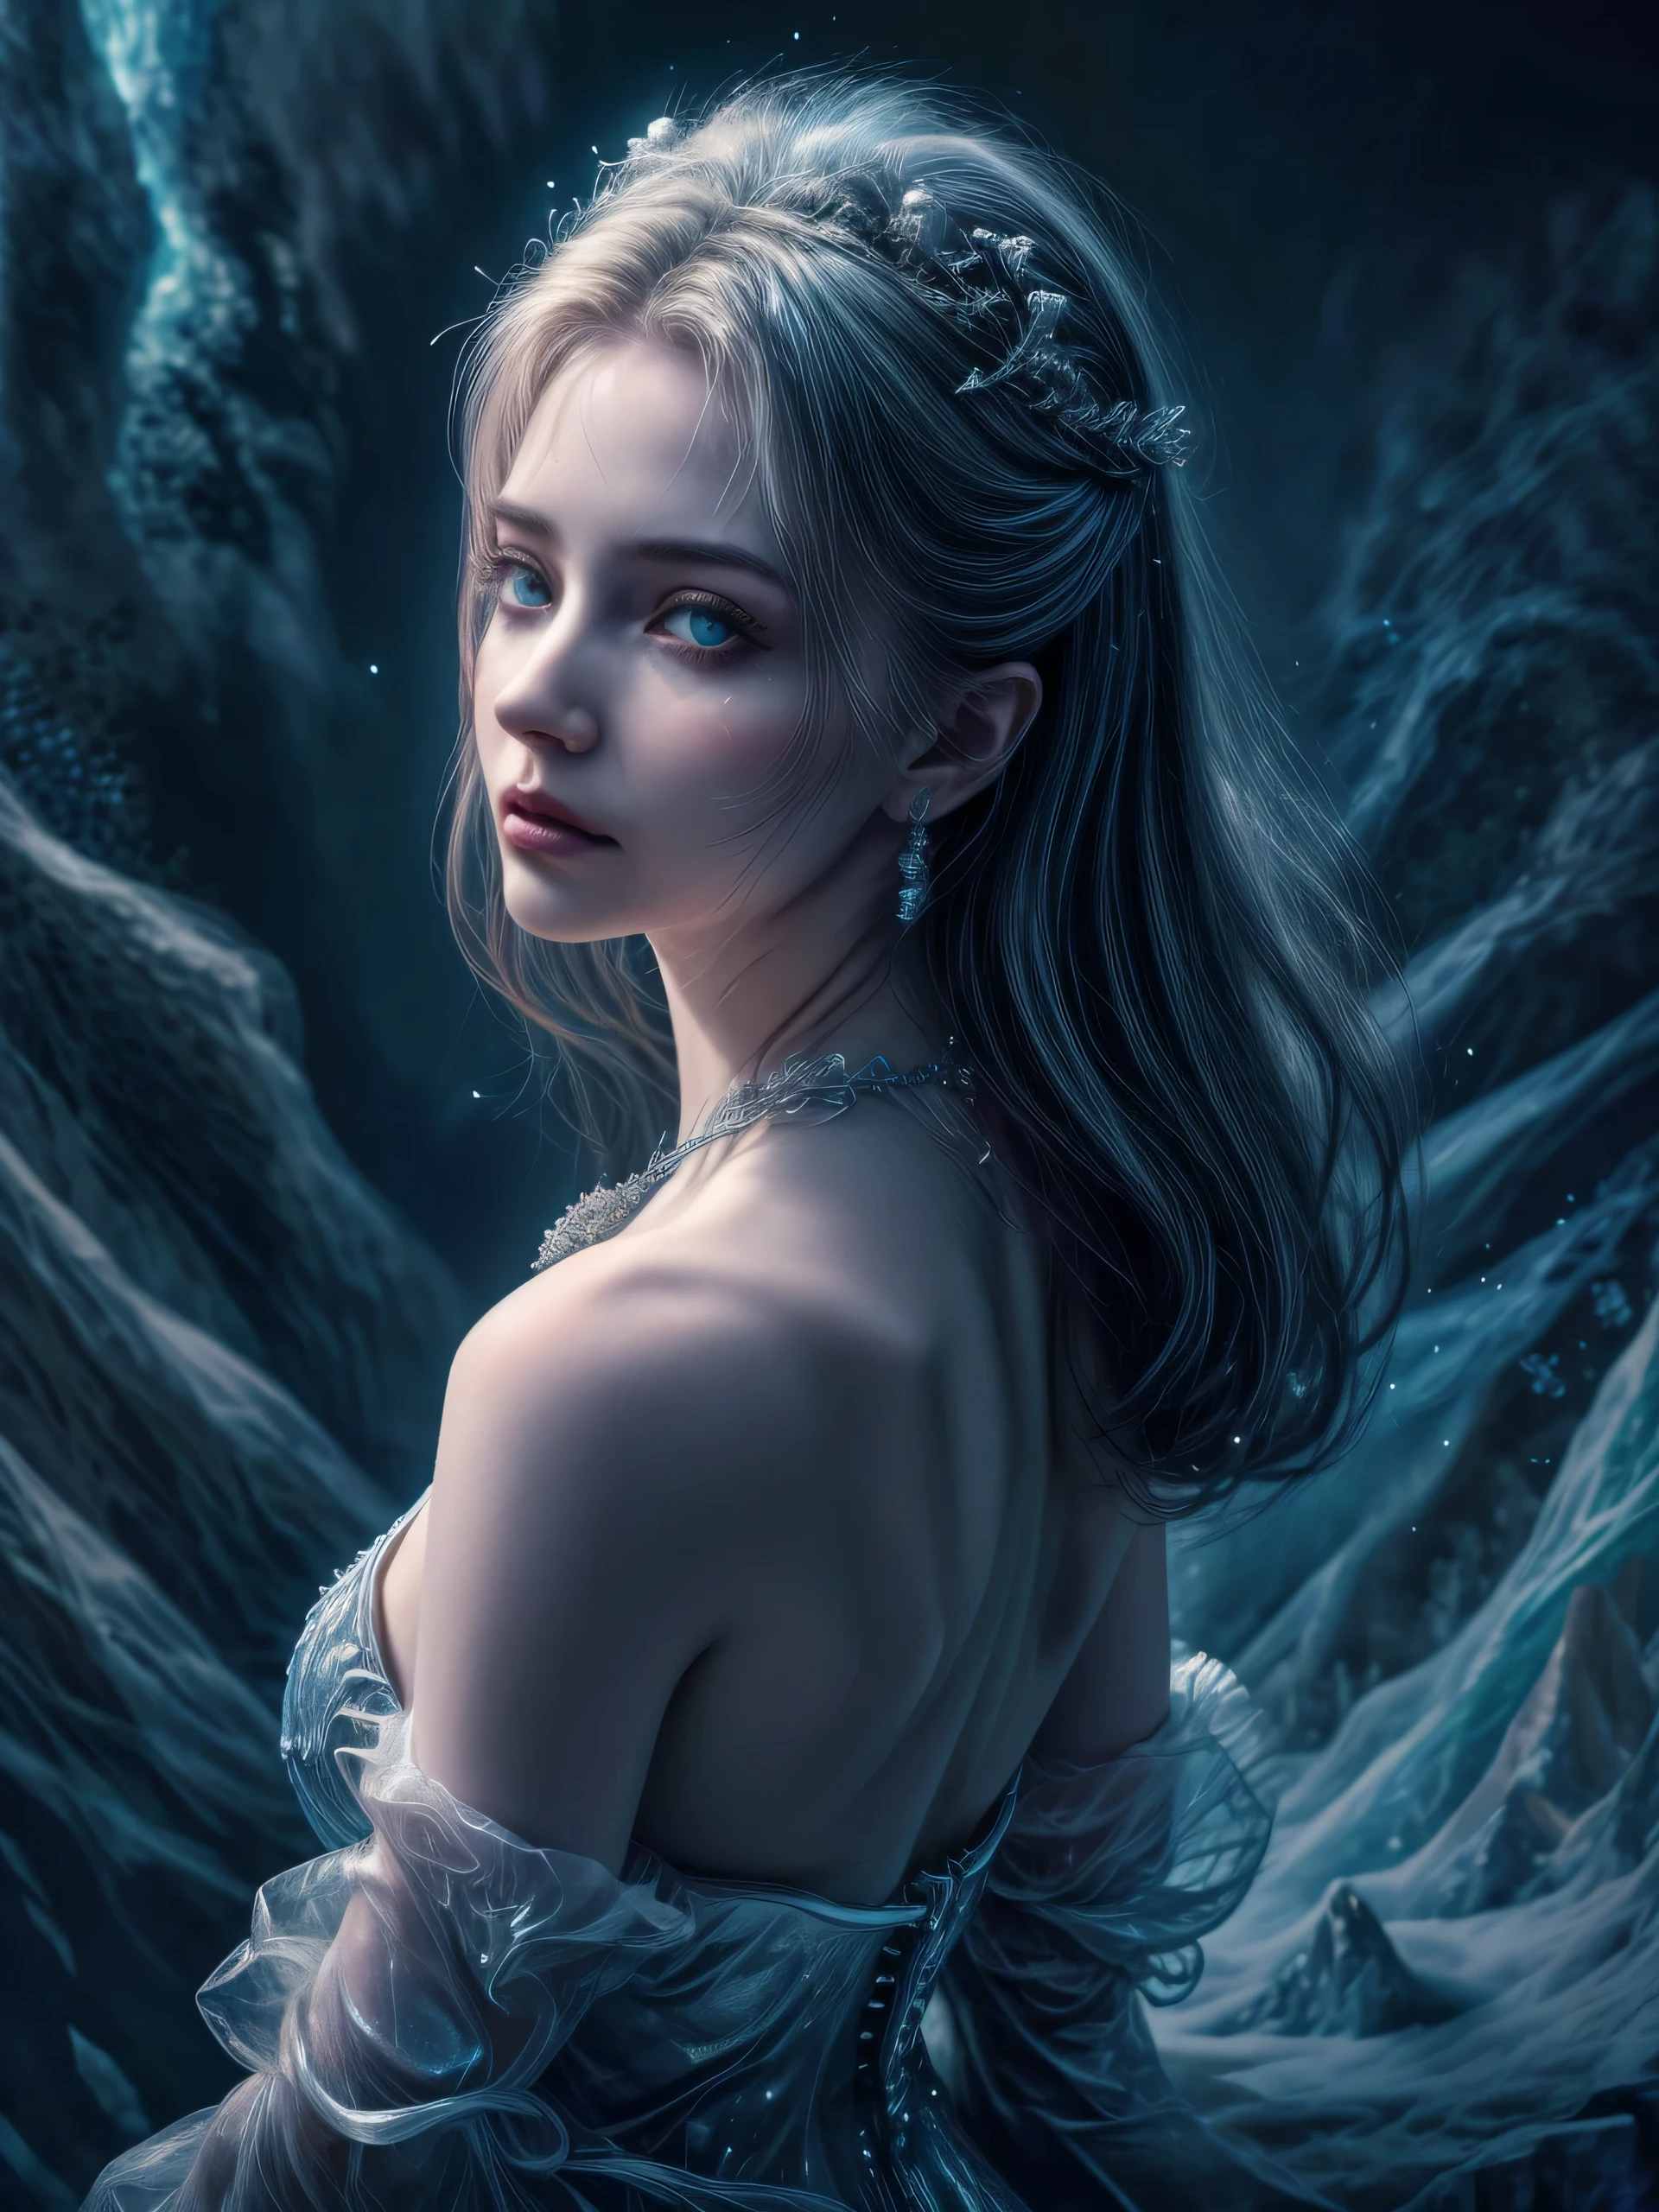 (Masterpiece, best quality, highres:1.3), 3D model, render at best quality, ((from back)), close-up, upper body, 1 goddess, queen of coldest ice, from epic fantasy game, feminine appearance, cleavage, detailed hair strands, delicate face, glowing blue eyes, cold gaze, fully dressed in noble sheer dress with ice effect, ice tiara, casting spell posture, immense blizzard storm, snow storm, ice spell, ice shard, frozen realm.